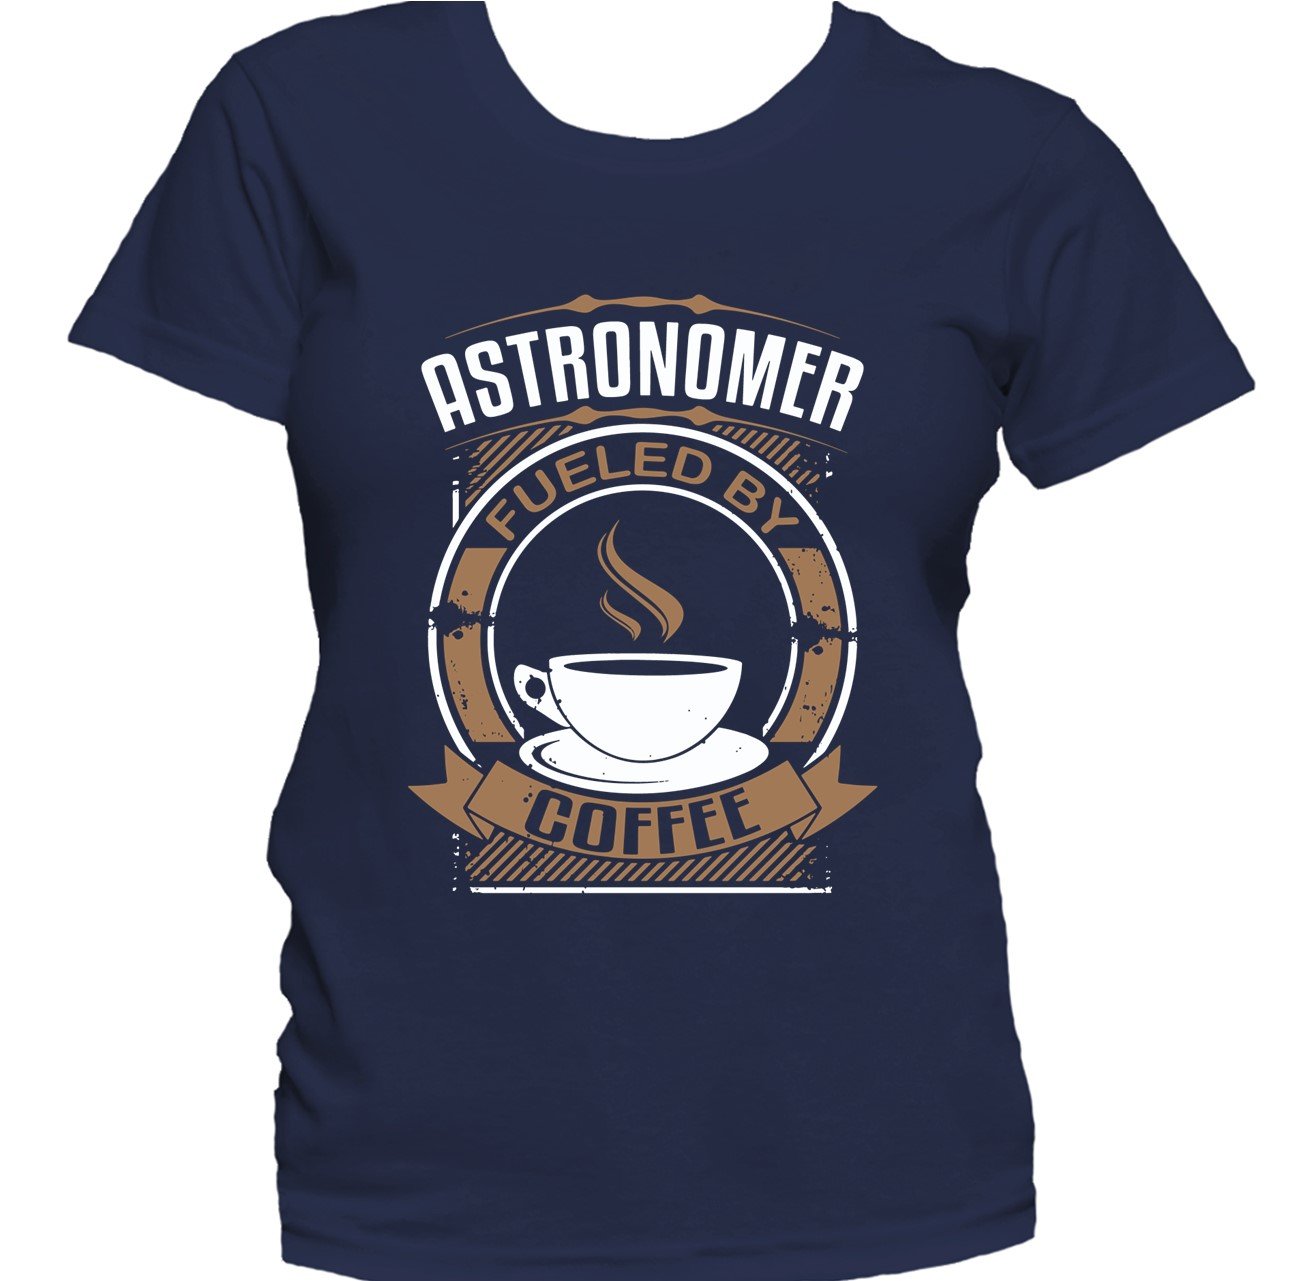 Astronomer Fueled By Coffee Funny Astronomy Women's T-Shirt